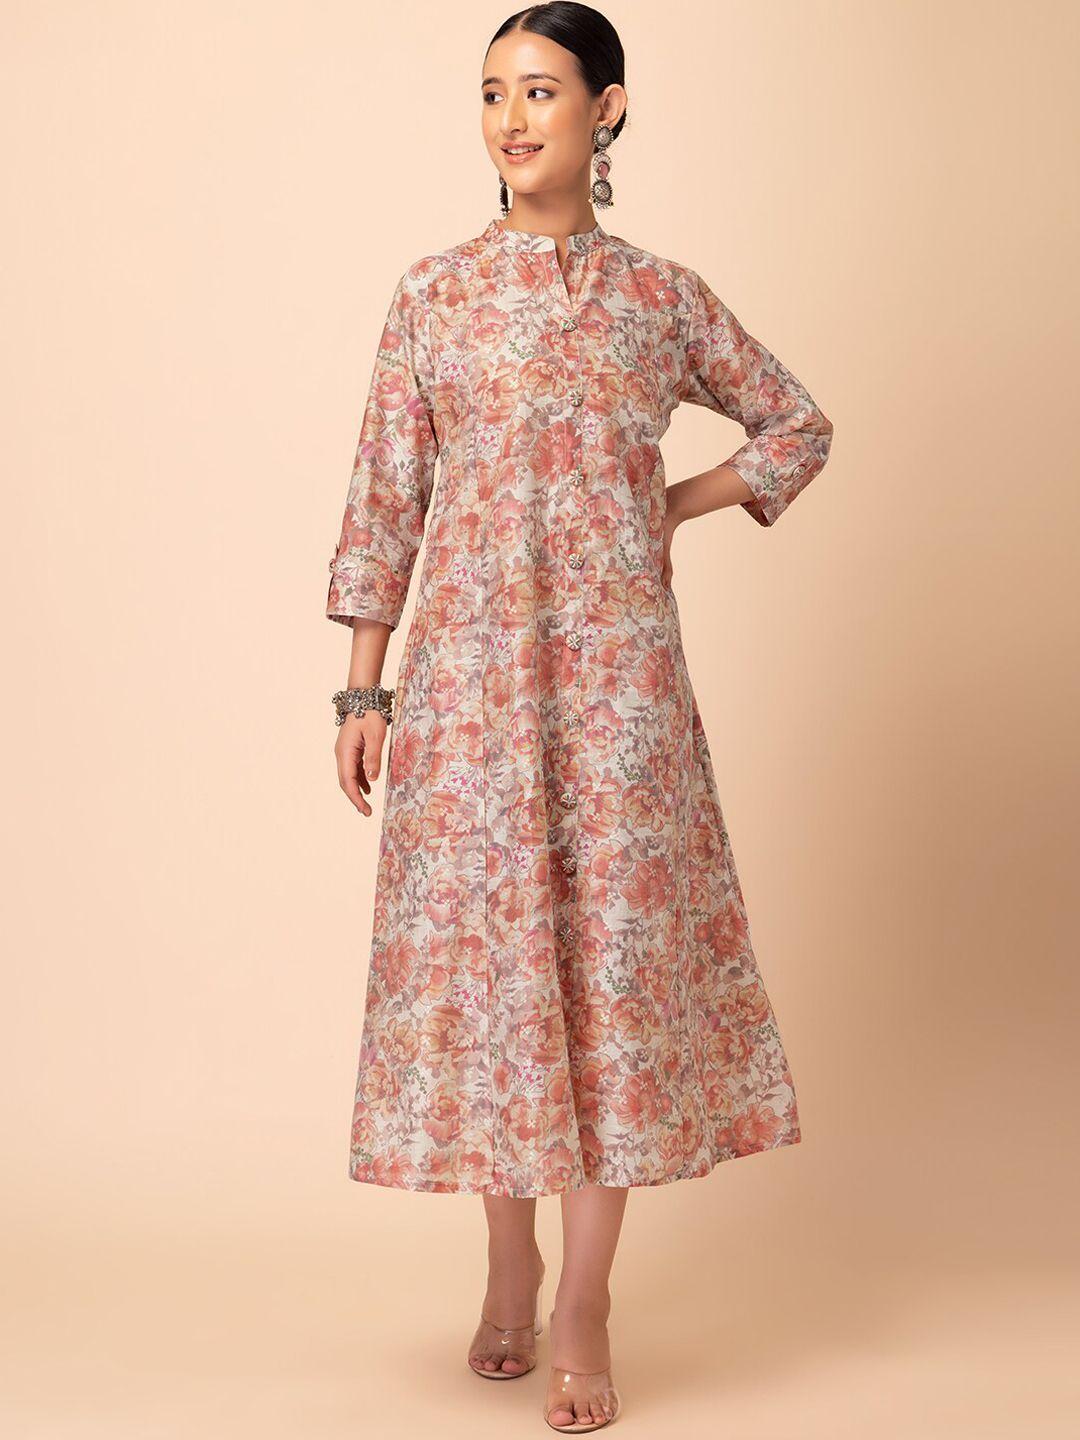 rang by indya floral foil printed mandarin collar a-line pure cotton ethnic dress